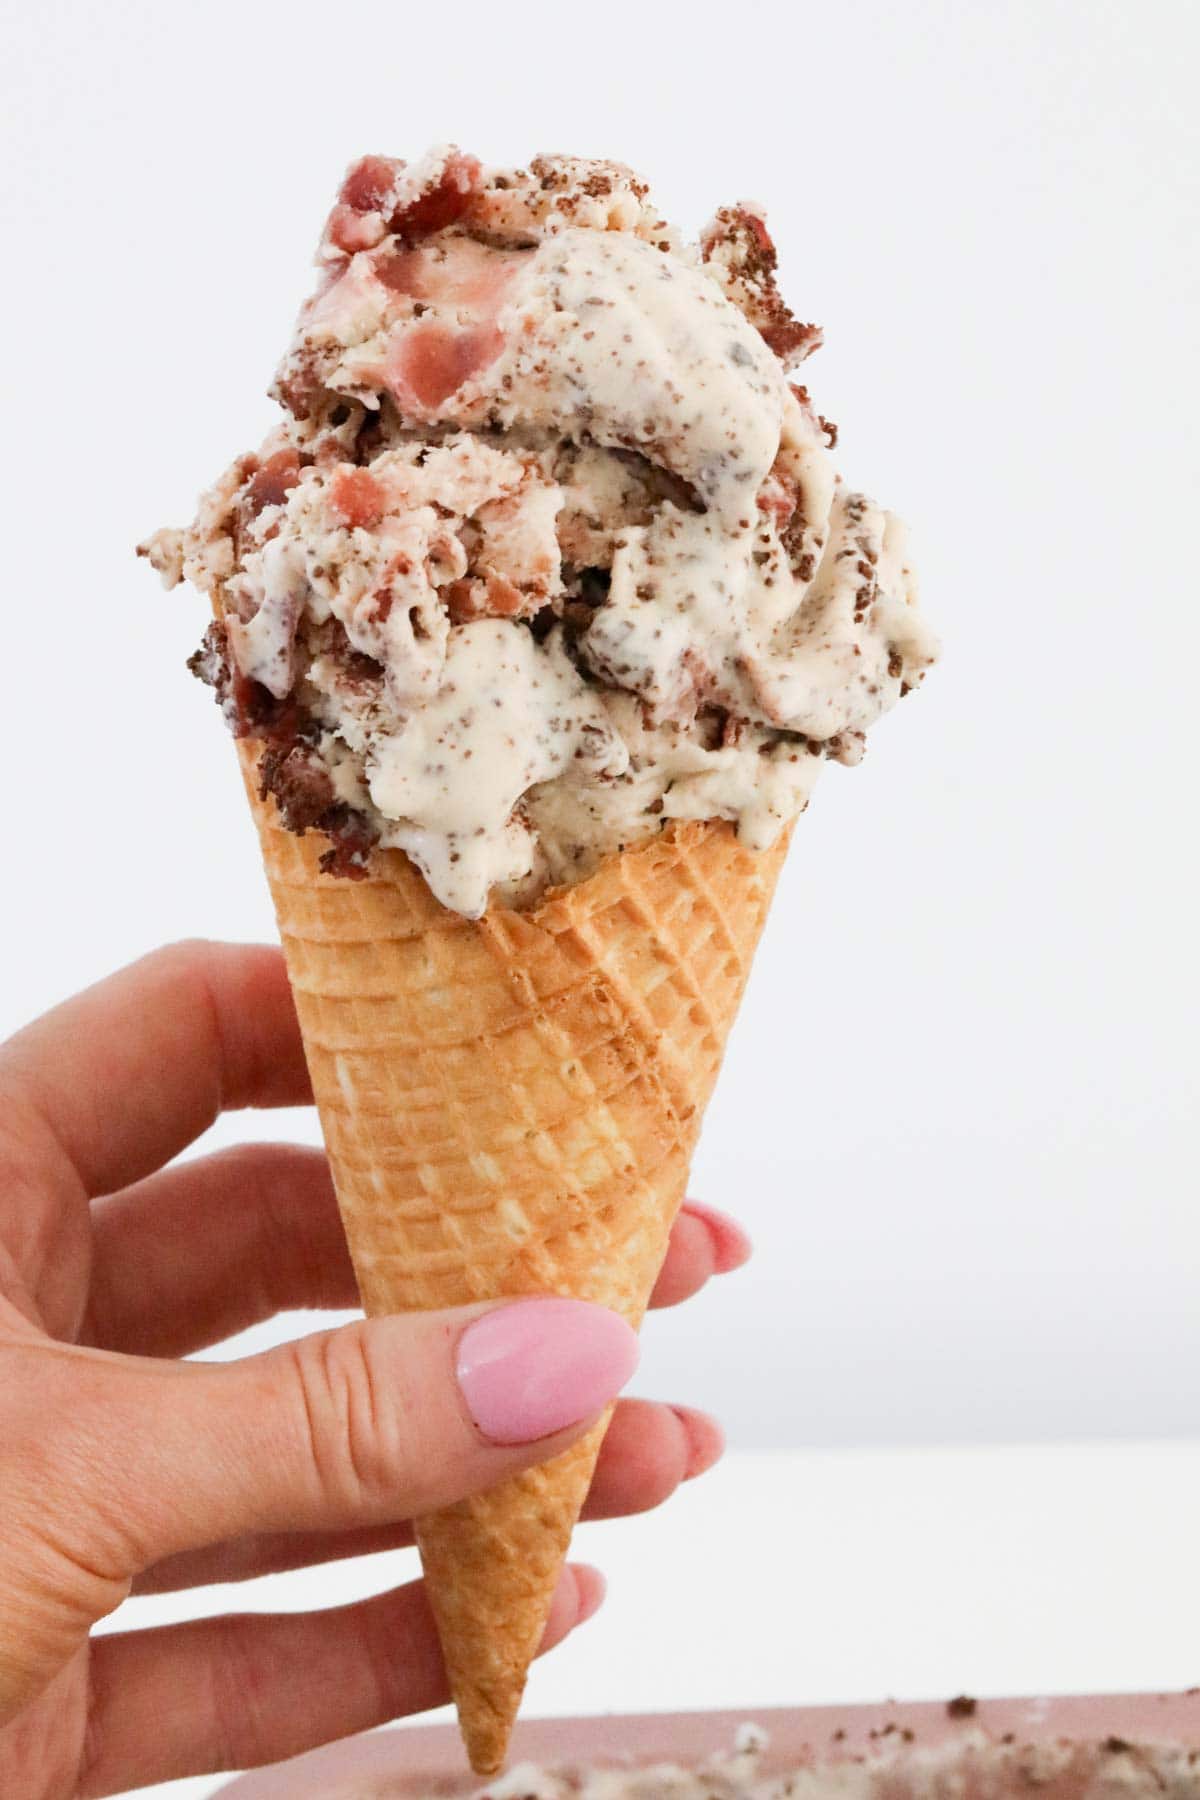 Black forest ice cream in a waffle cone being held up.